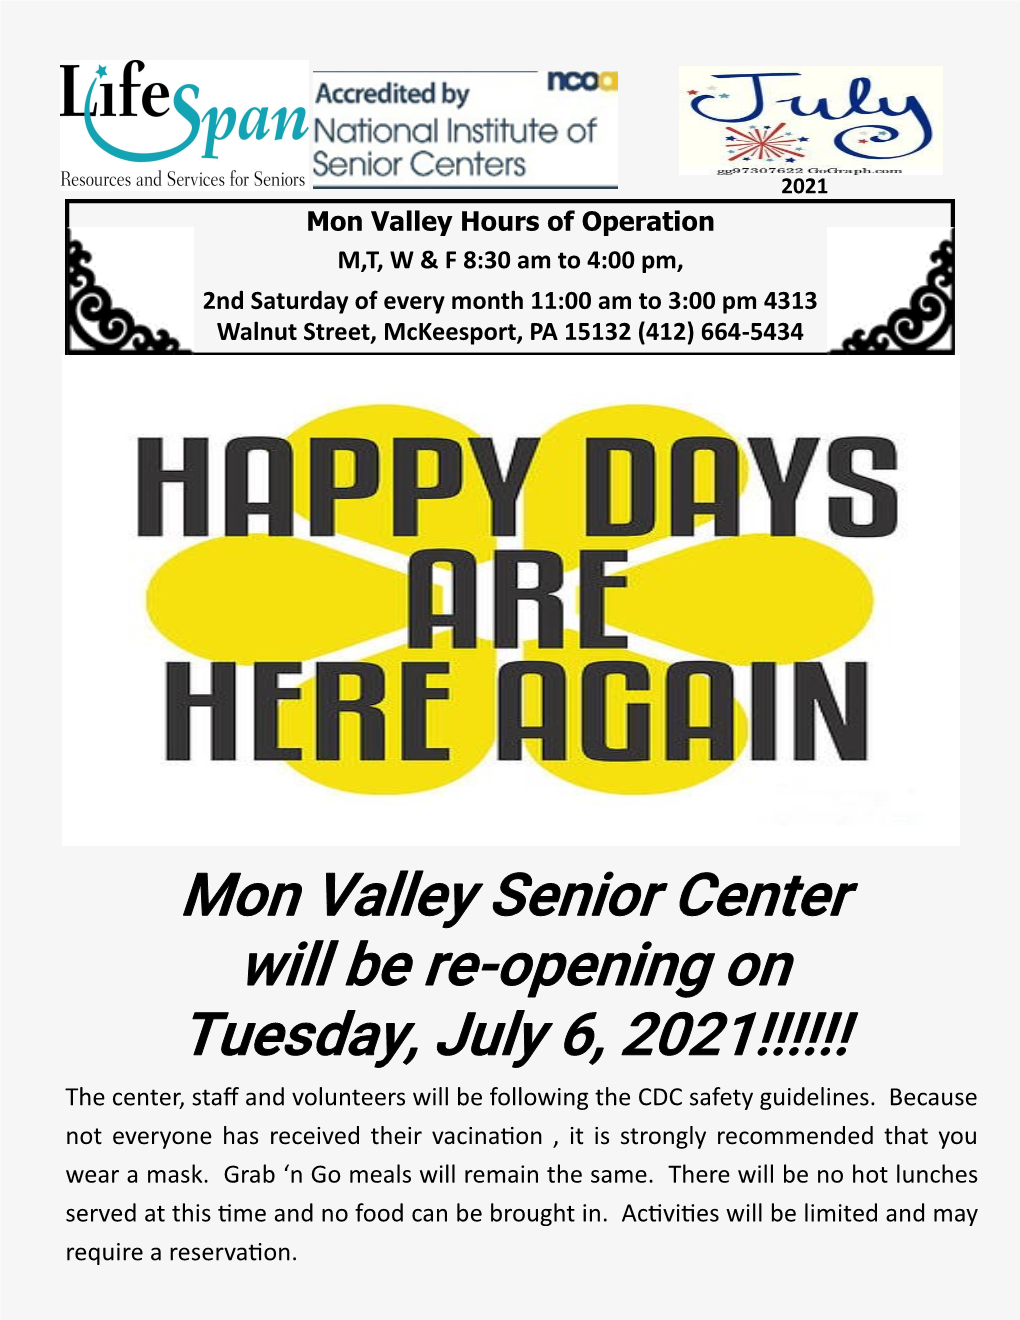 Mon Valley Senior Center Will Be Re-Opening on Tuesday, July 6, 2021!!!!!! the Center, Staff and Volunteers Will Be Following the CDC Safety Guidelines